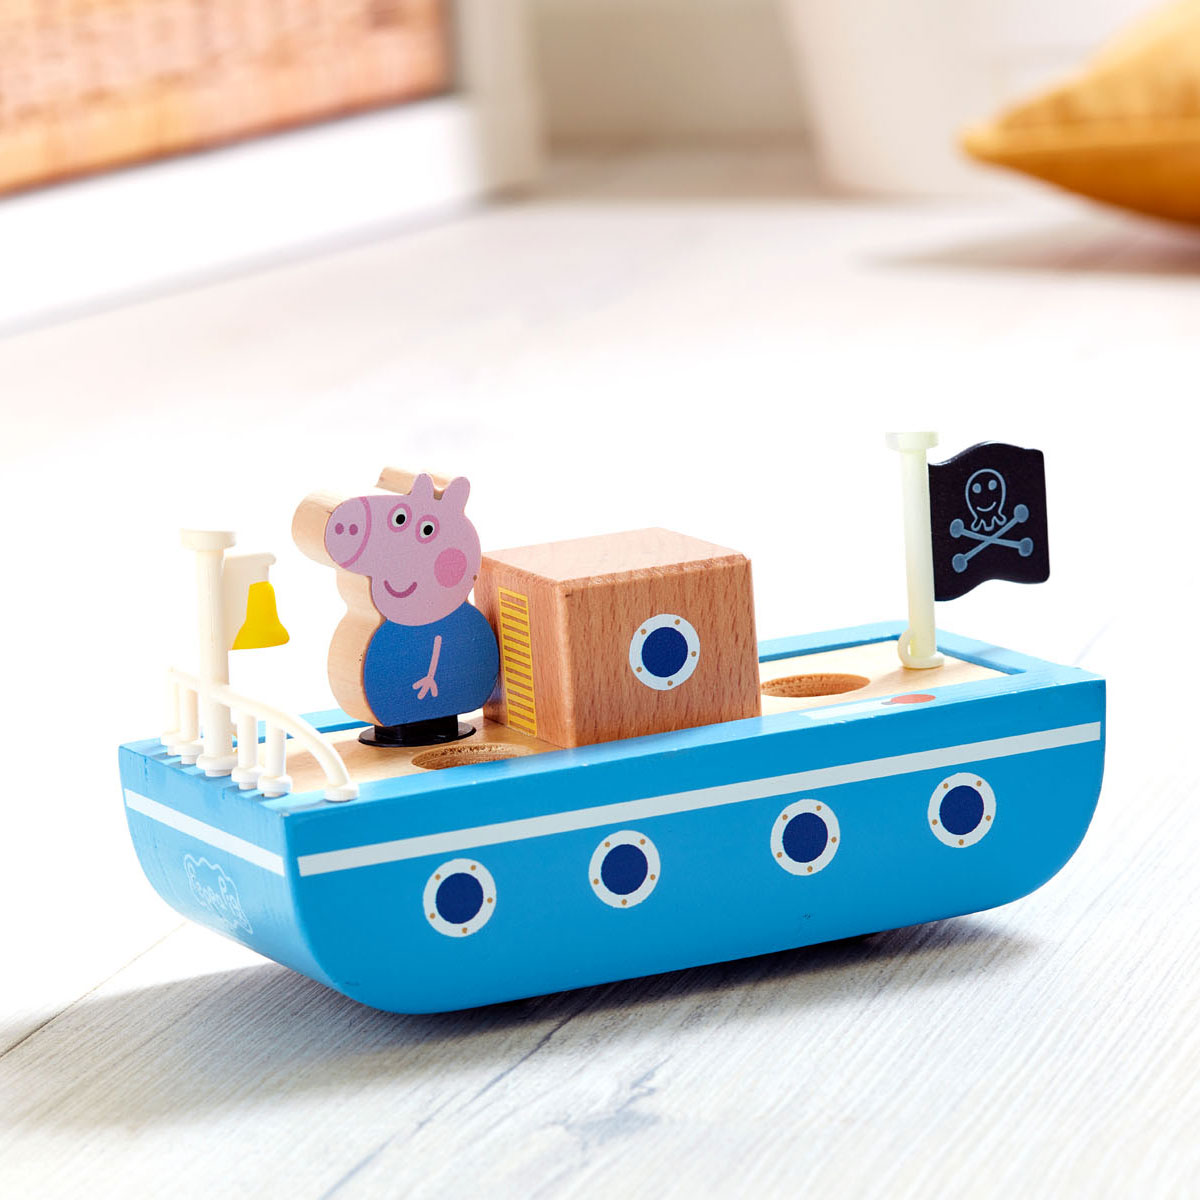 Peppa Pig Wooden Boat with Figure